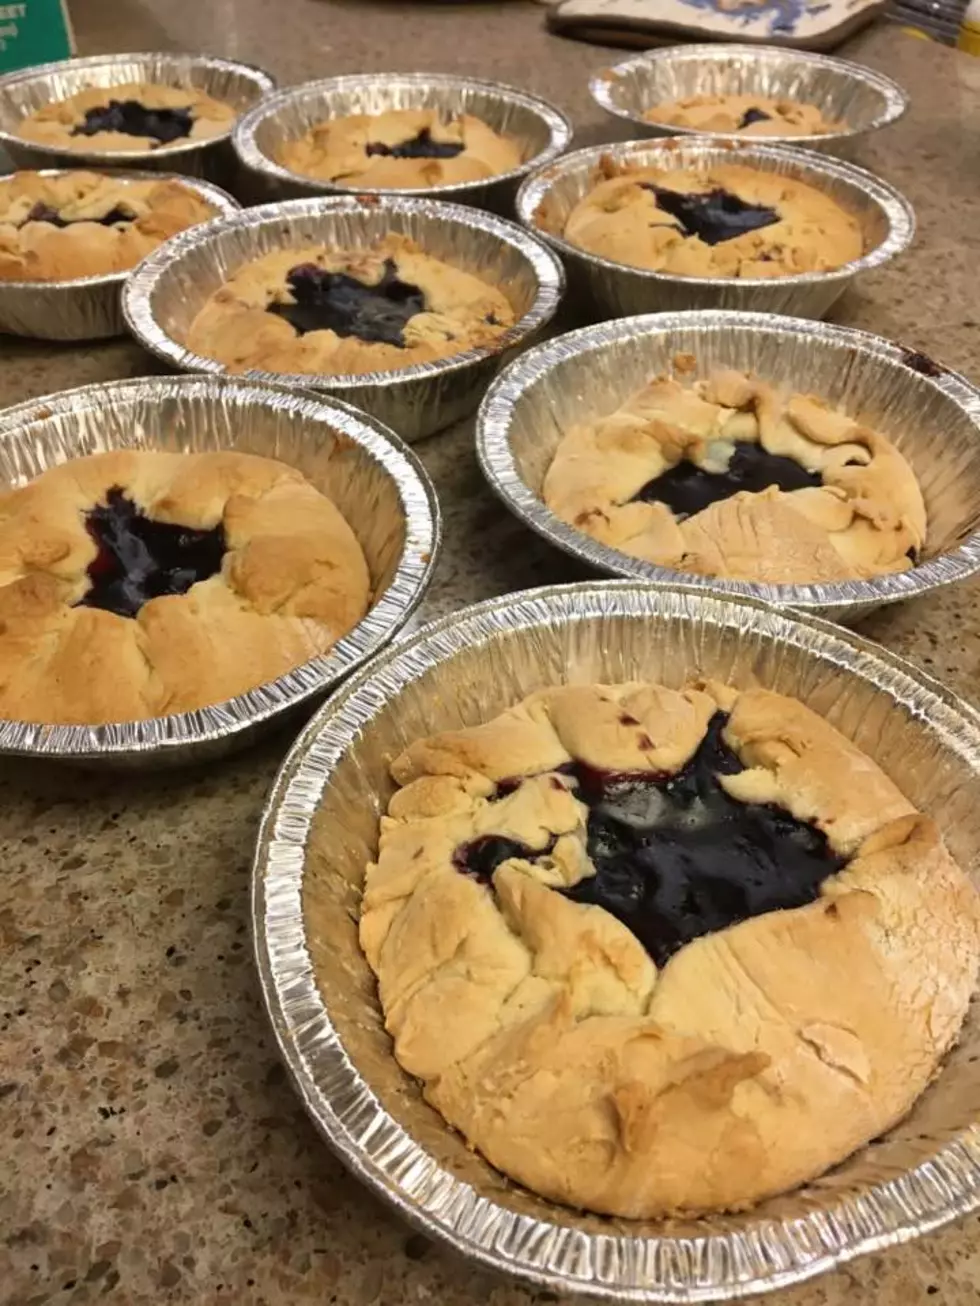 Sweet Dough Pie Festival is Saturday, October 28 in Grand Coteau